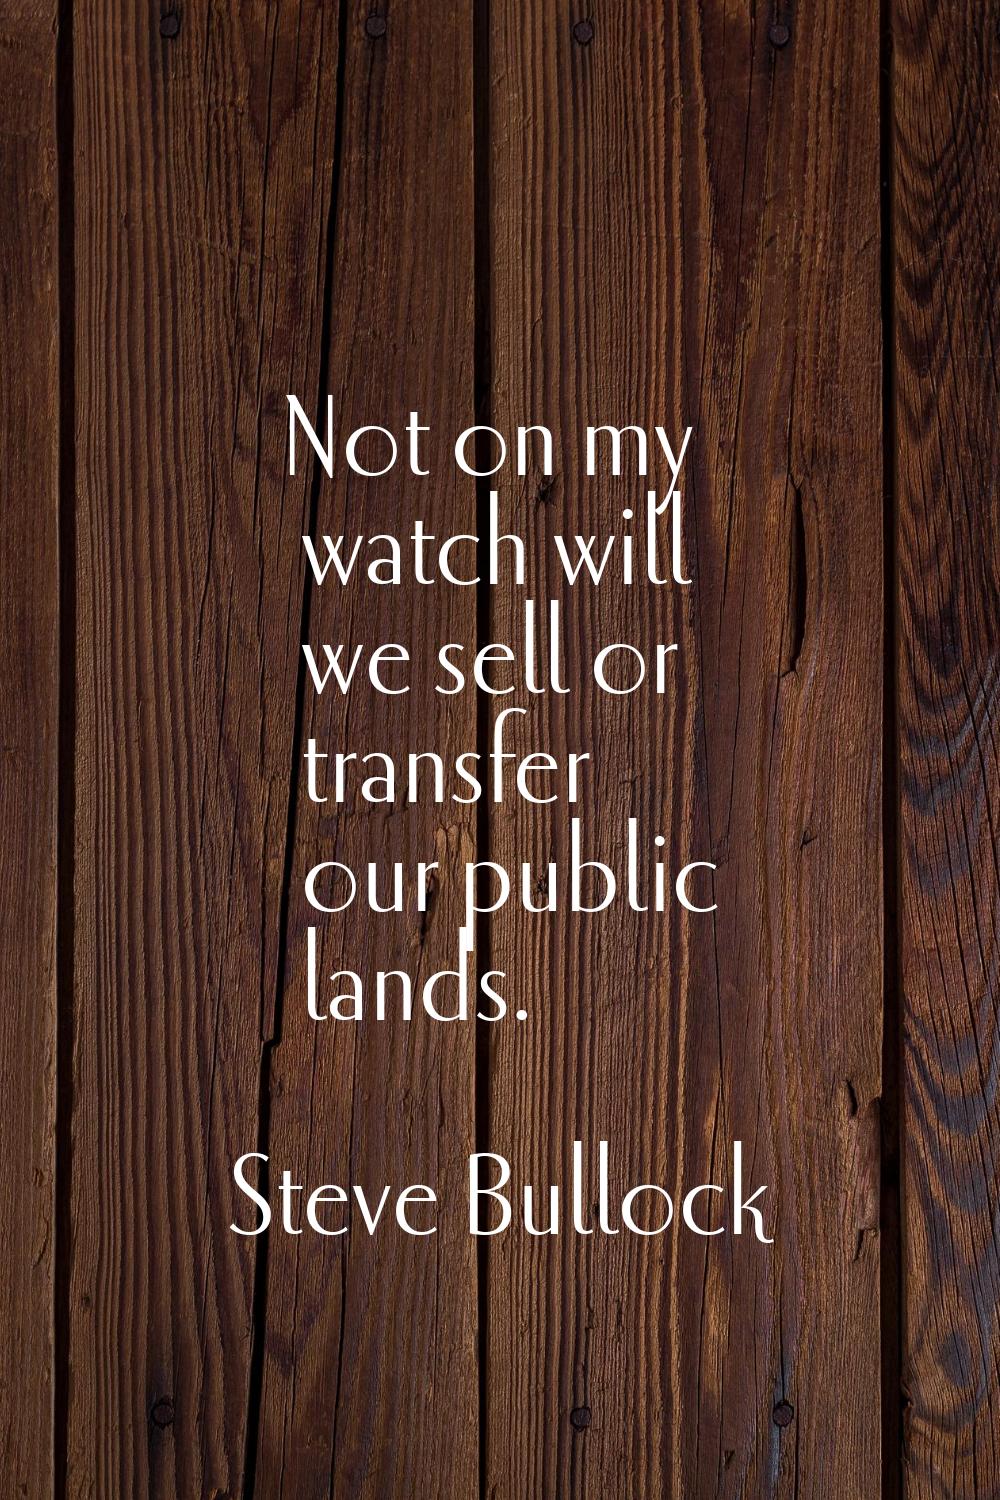 Not on my watch will we sell or transfer our public lands.